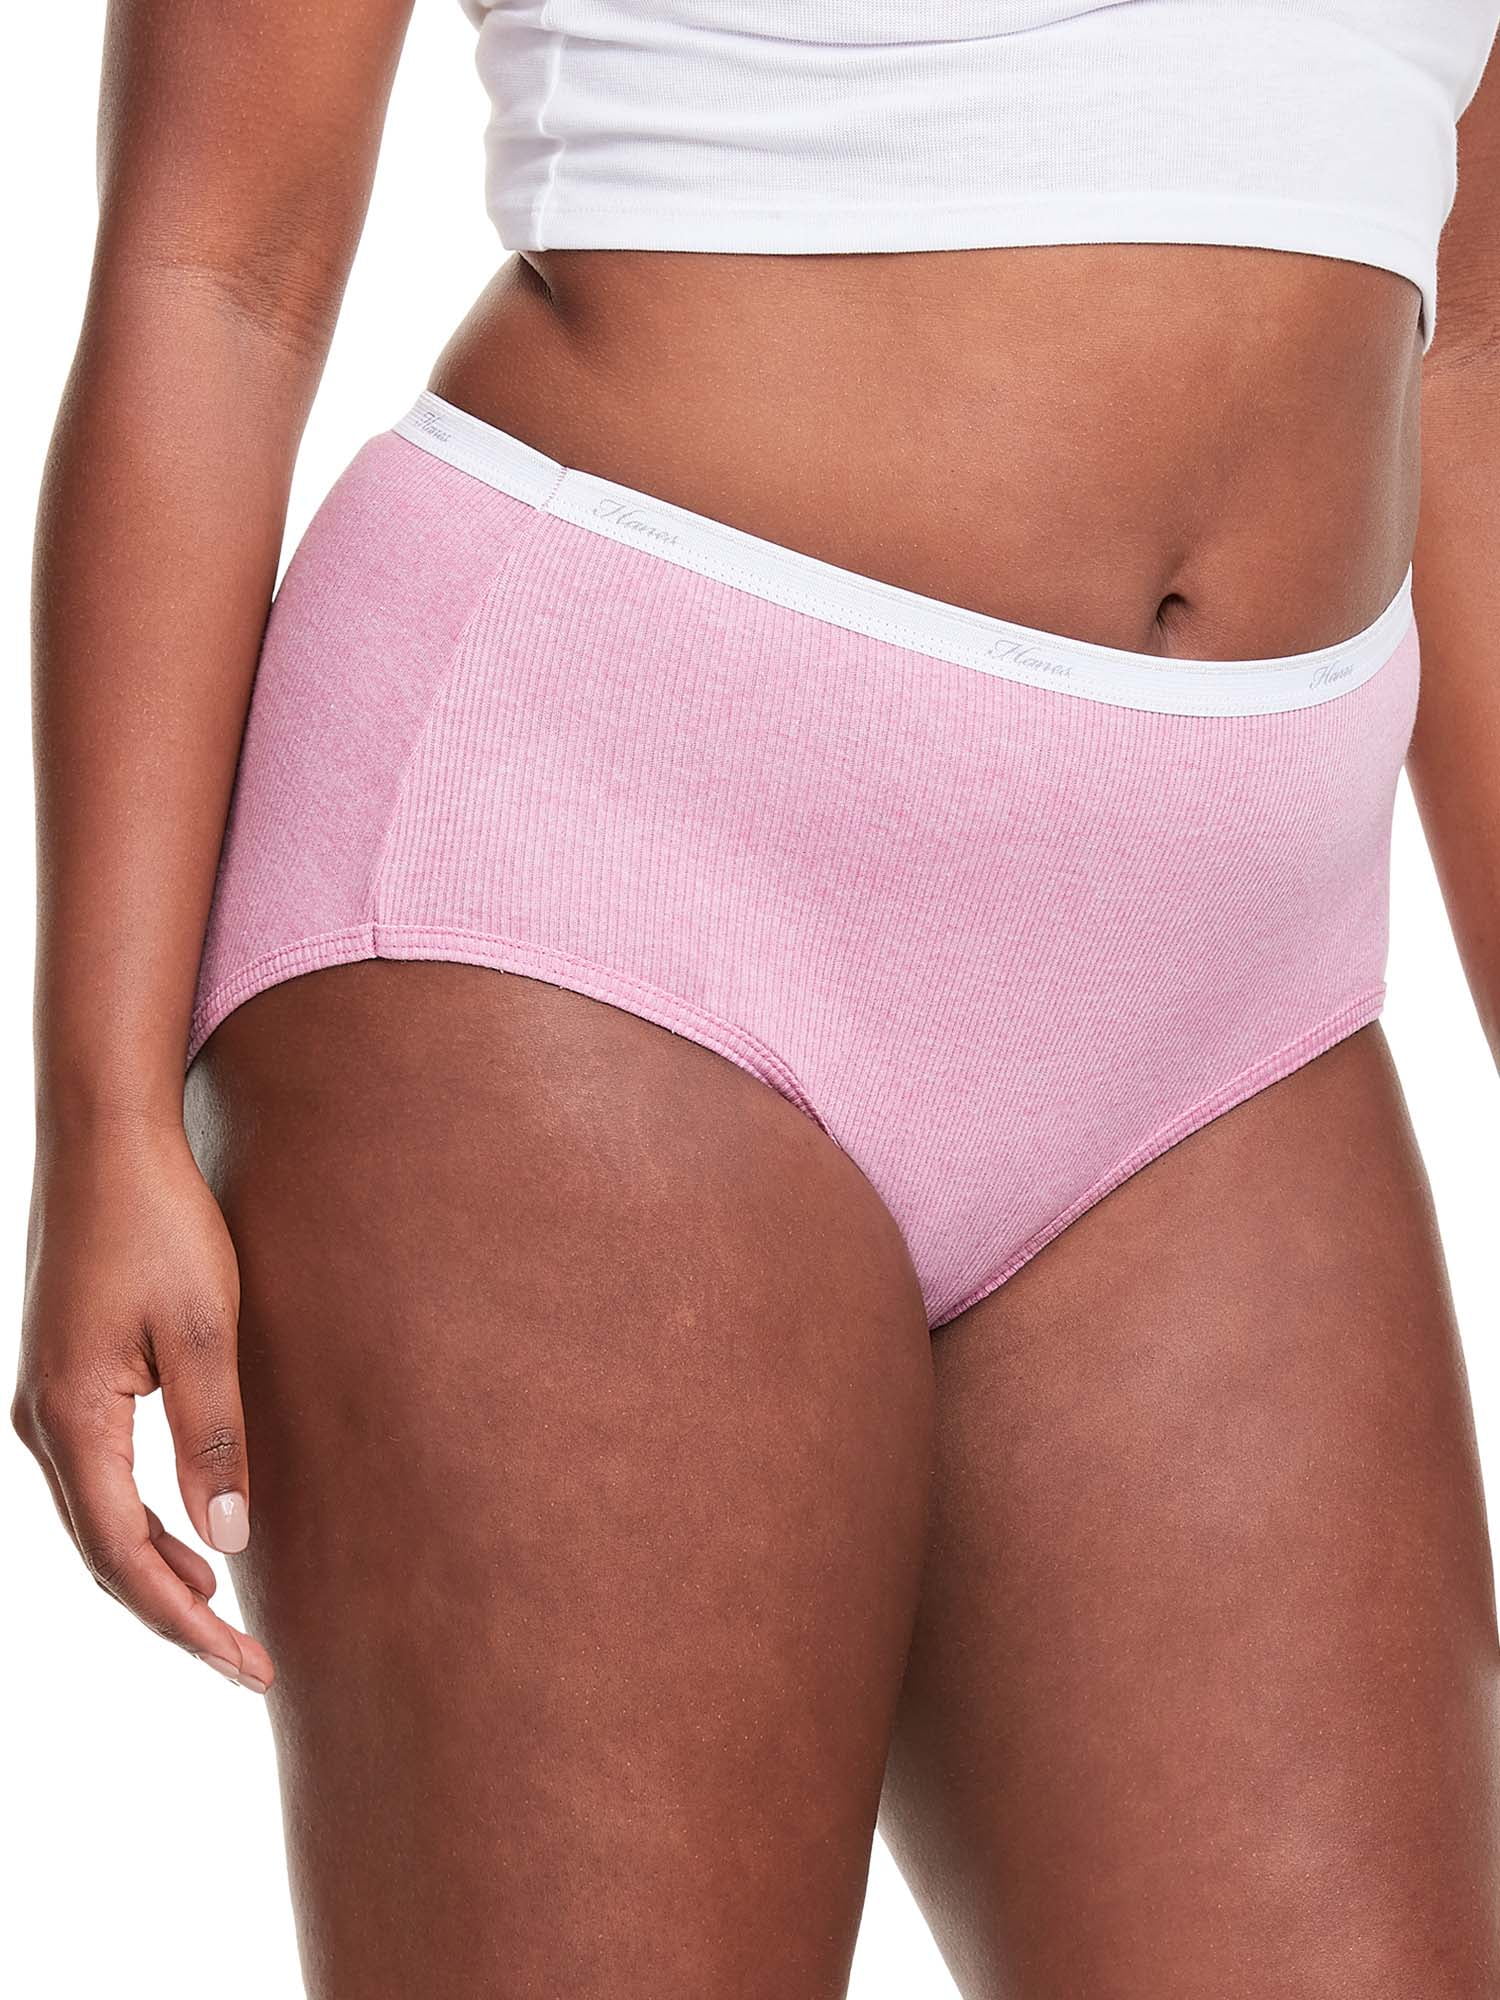 Ladies Women 100% Cotton Full Size Ribbed Briefs Knickers Underwear Pants